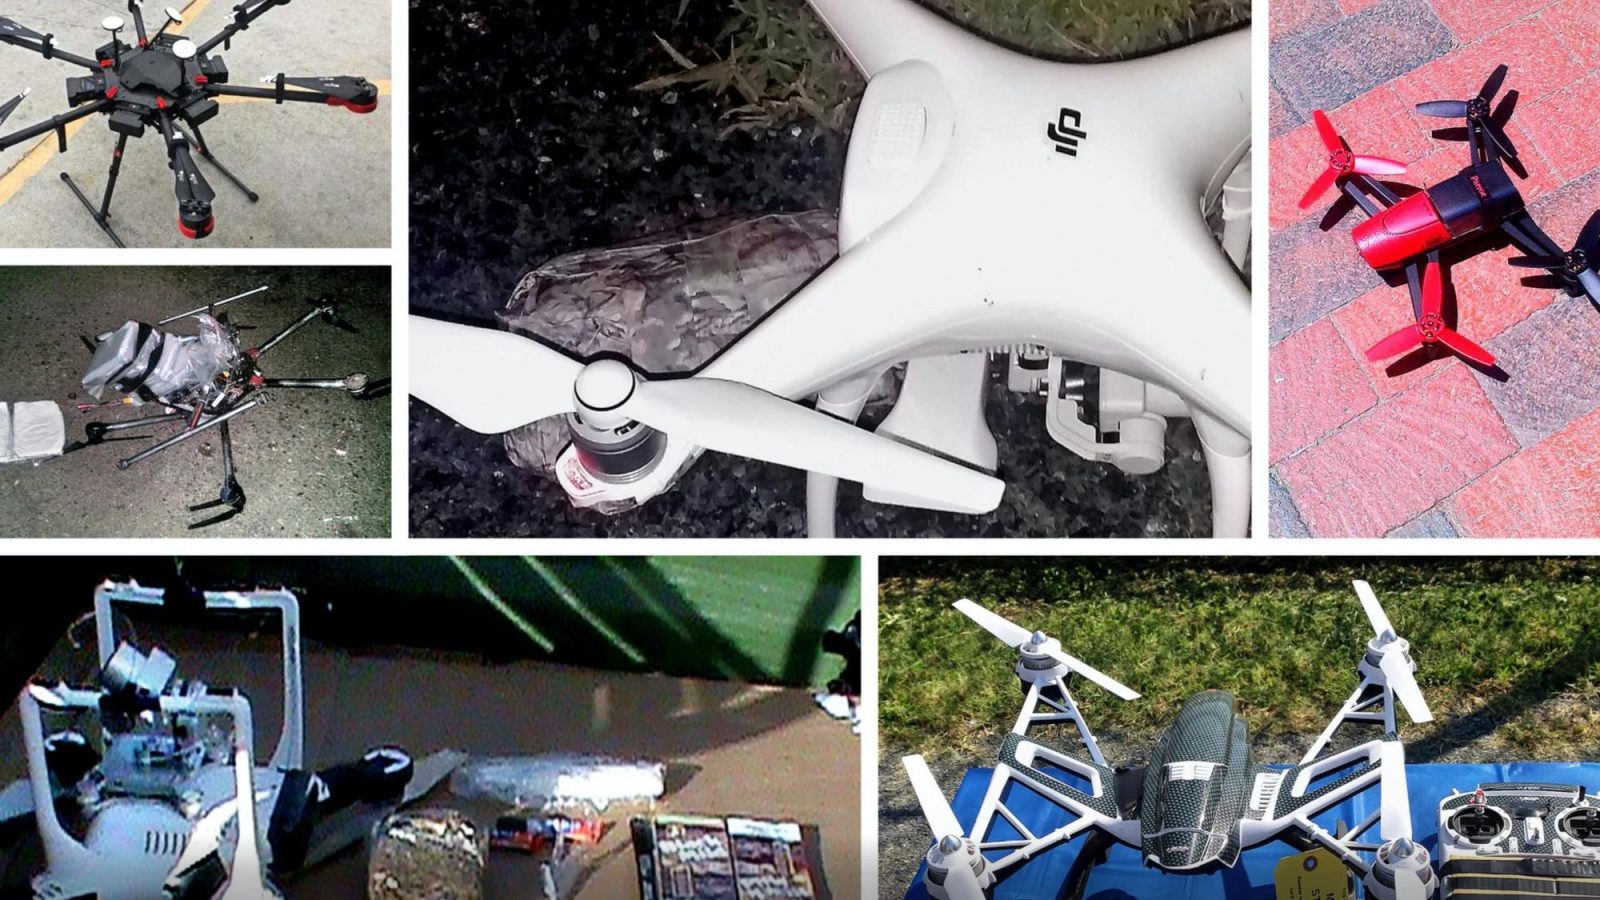 Local law enforcement powerless to stop drones used in crime